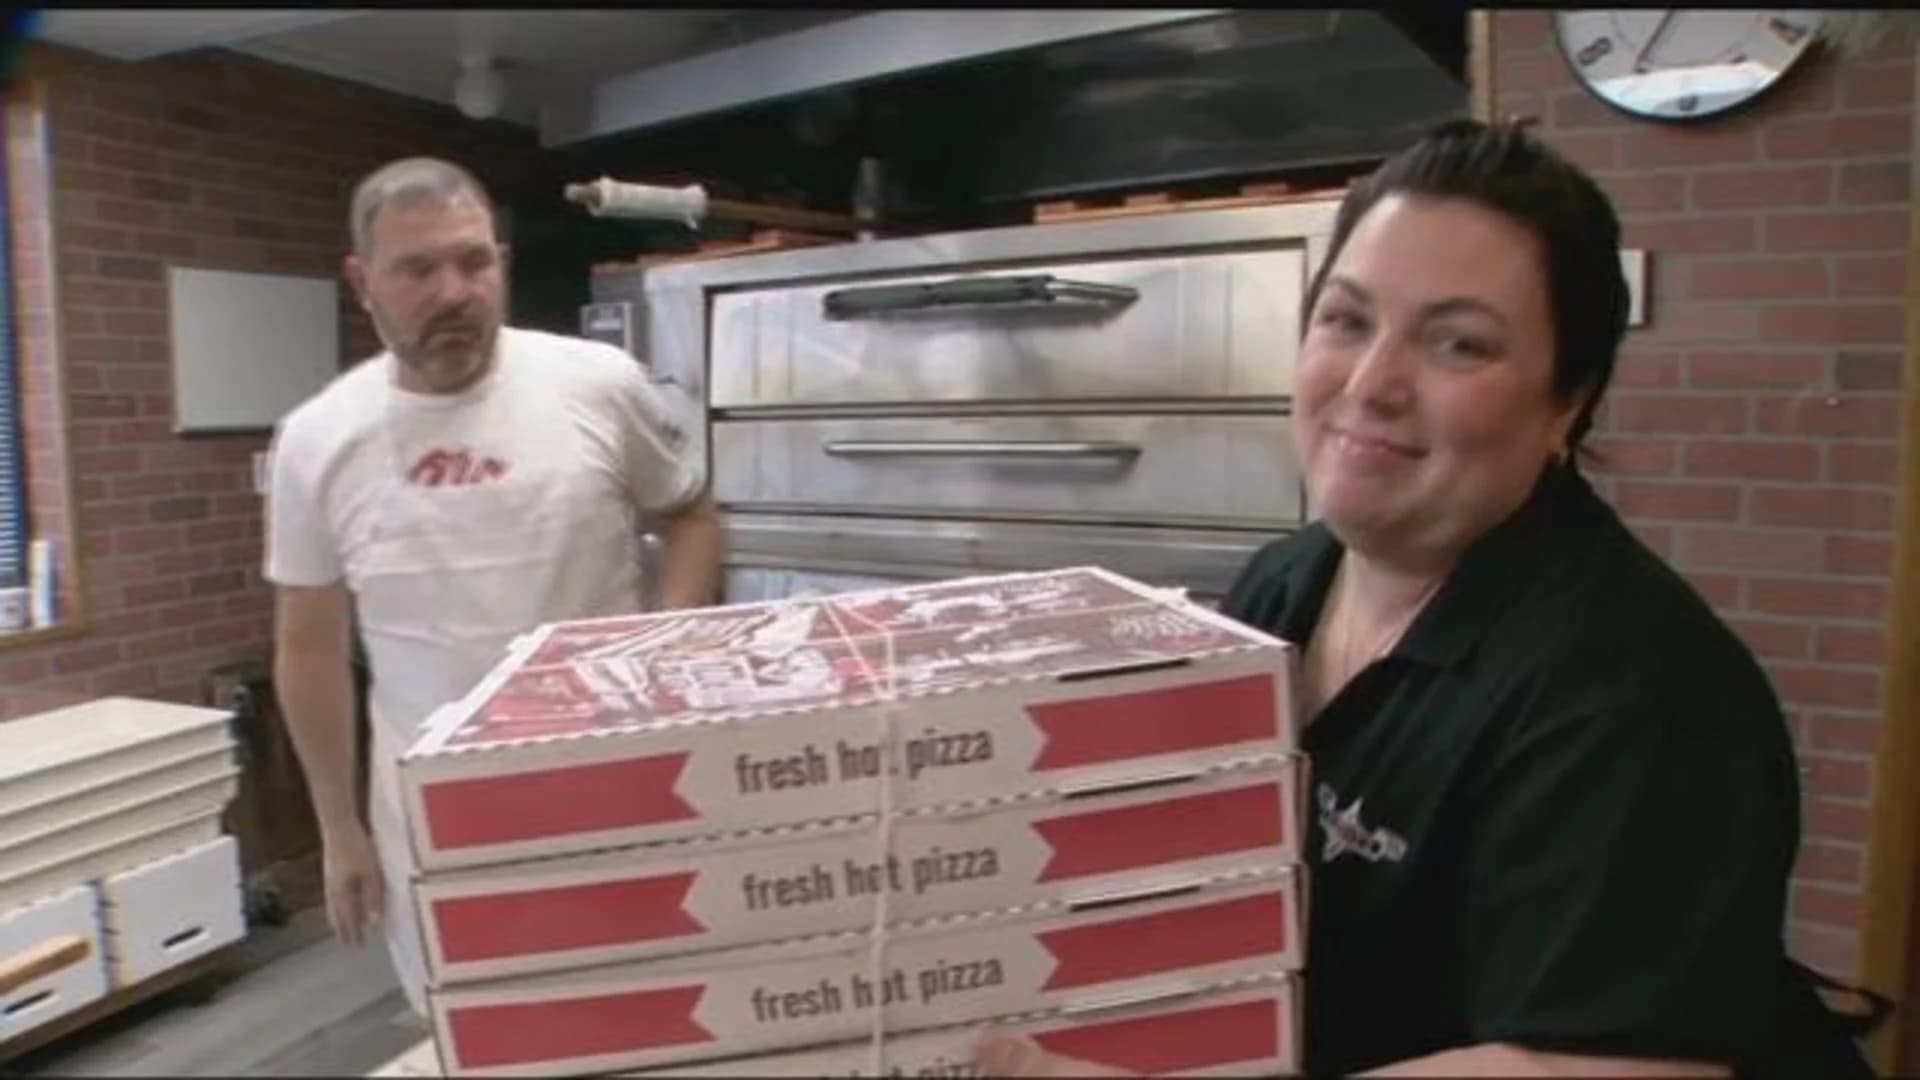 Mount Vernon pizzeria returns after fire, owner’s death